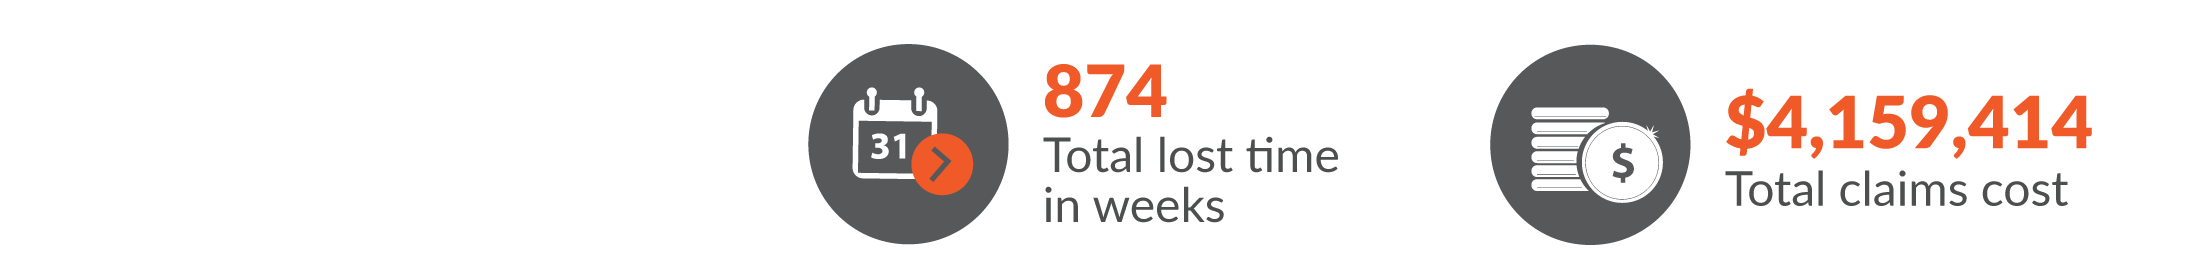 This infographic shows total Health and community services claims resulted in 874 total lost time in weeks and $4,159,414 was paid in benefits.